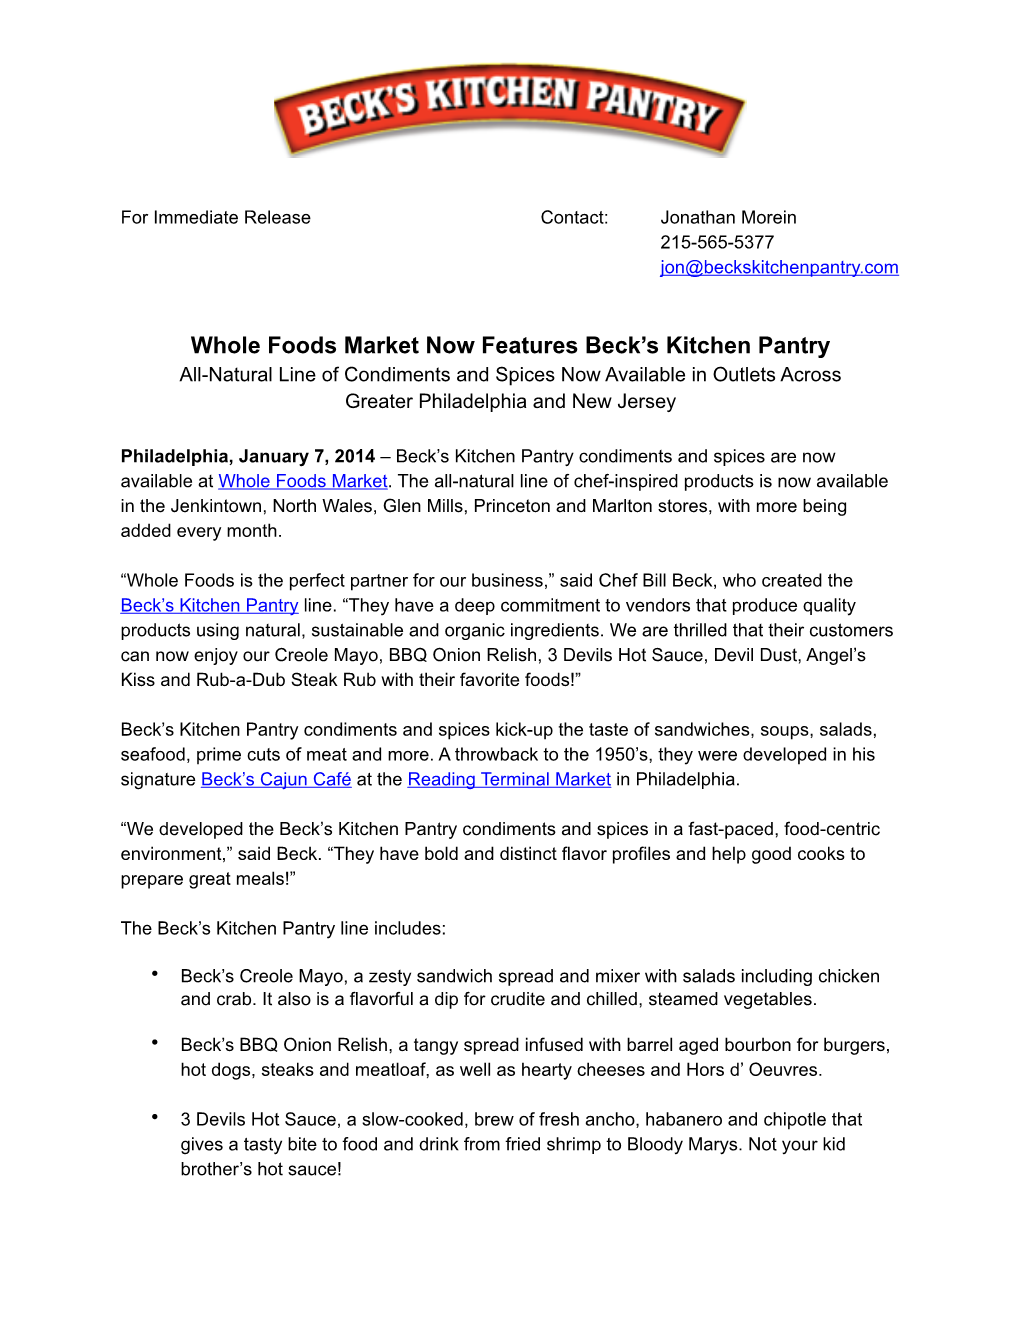 Whole Foods Market Now Features Beck's Kitchen Pantry